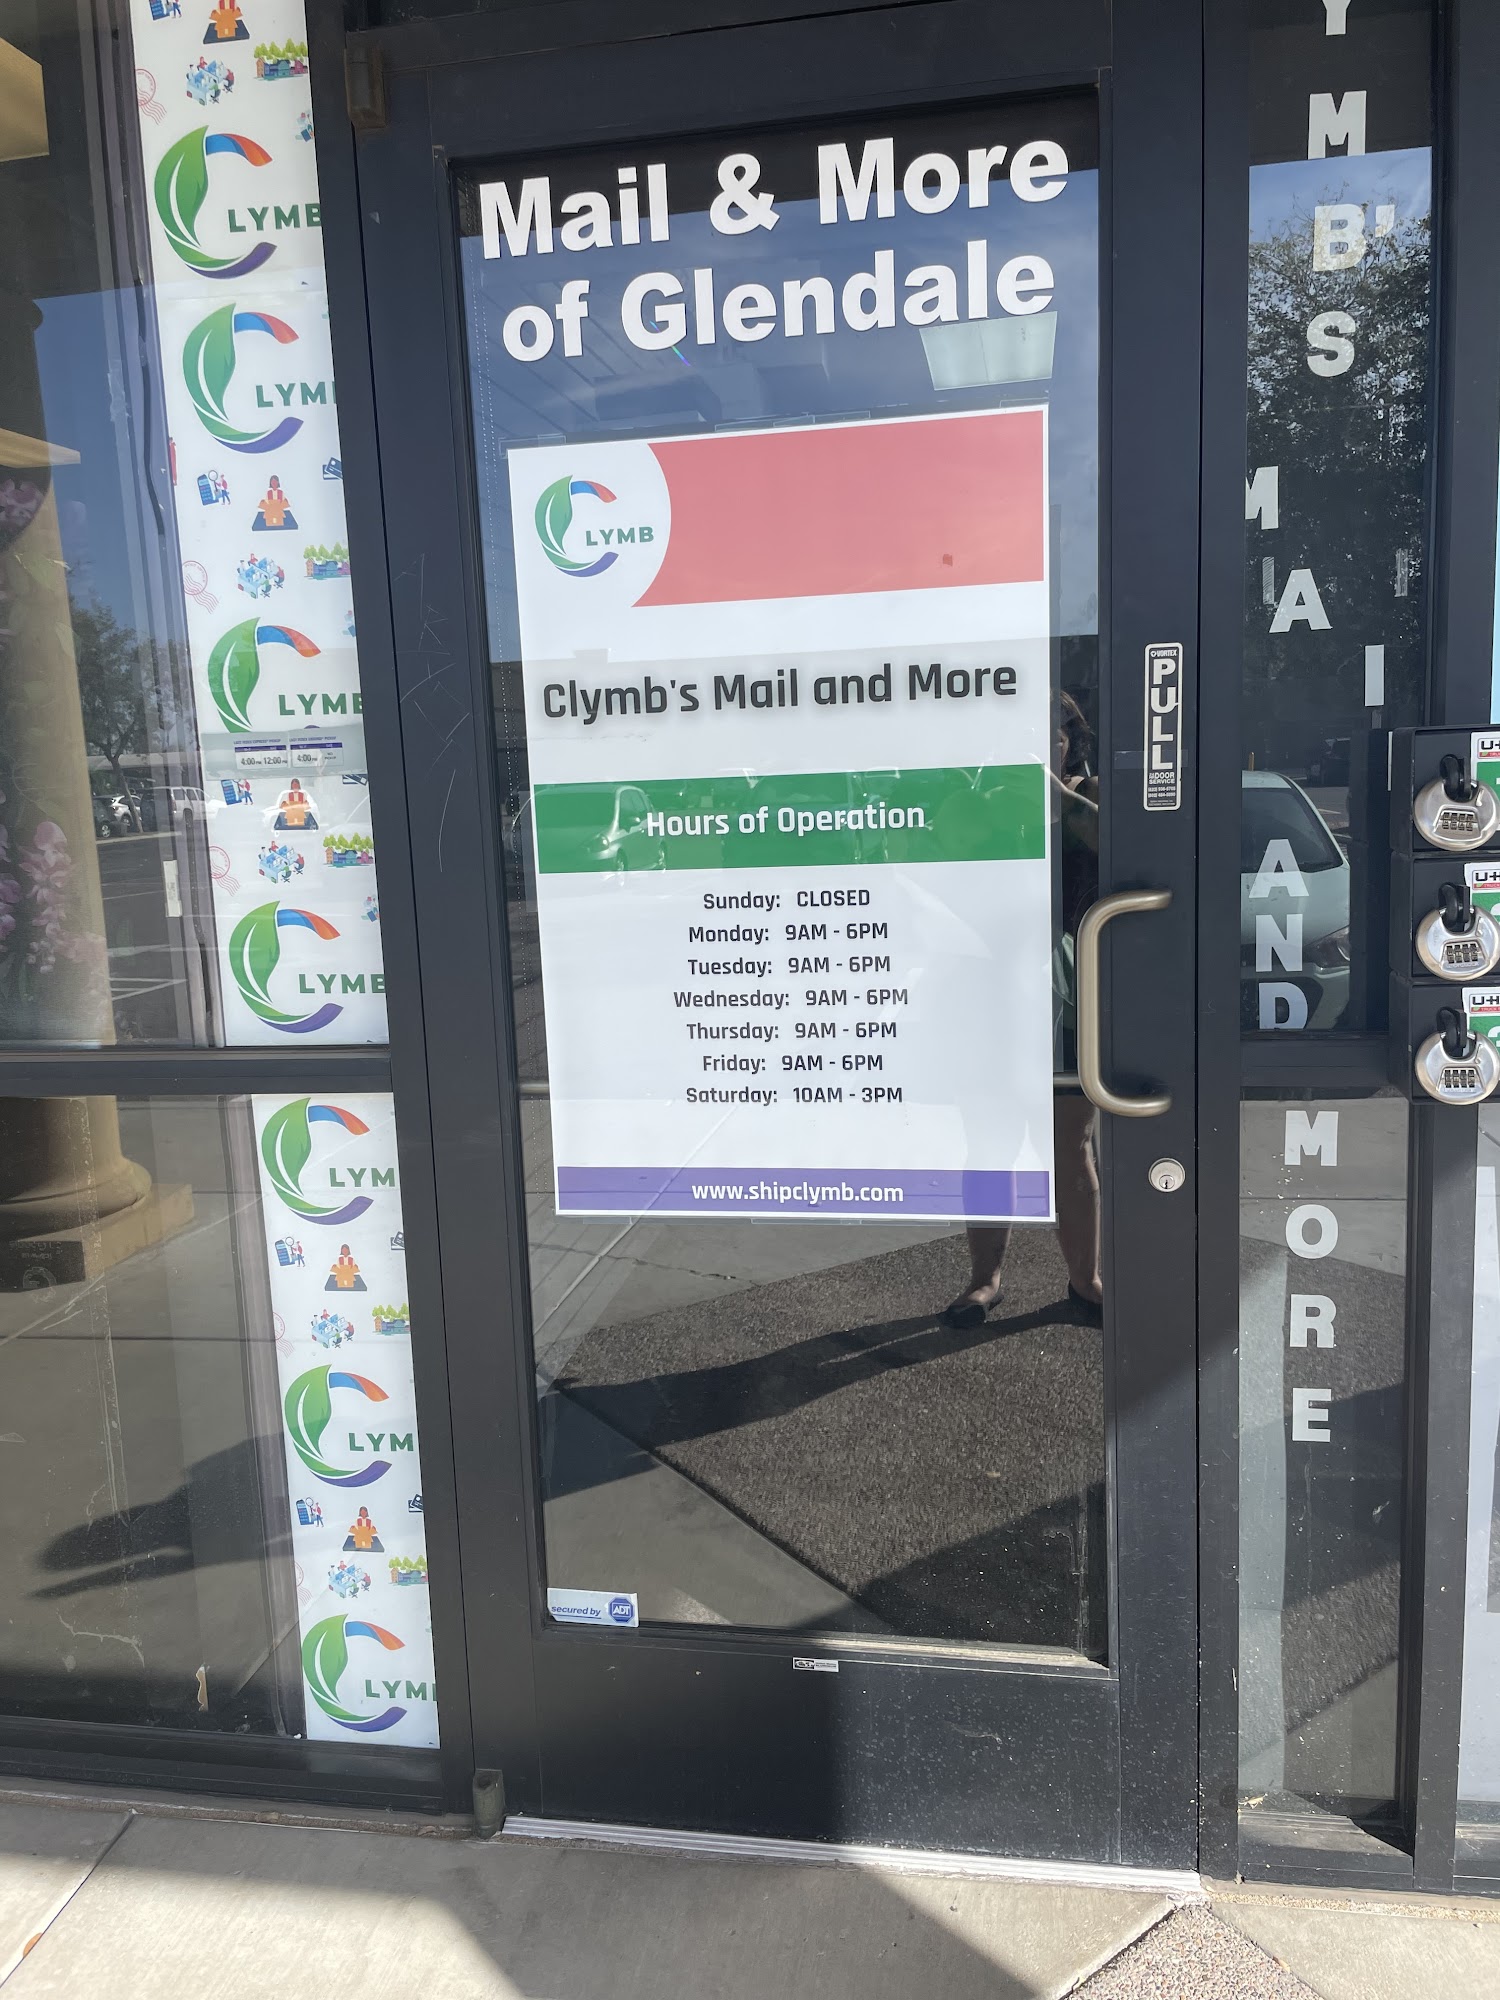 Clymb's Mail and More of Glendale